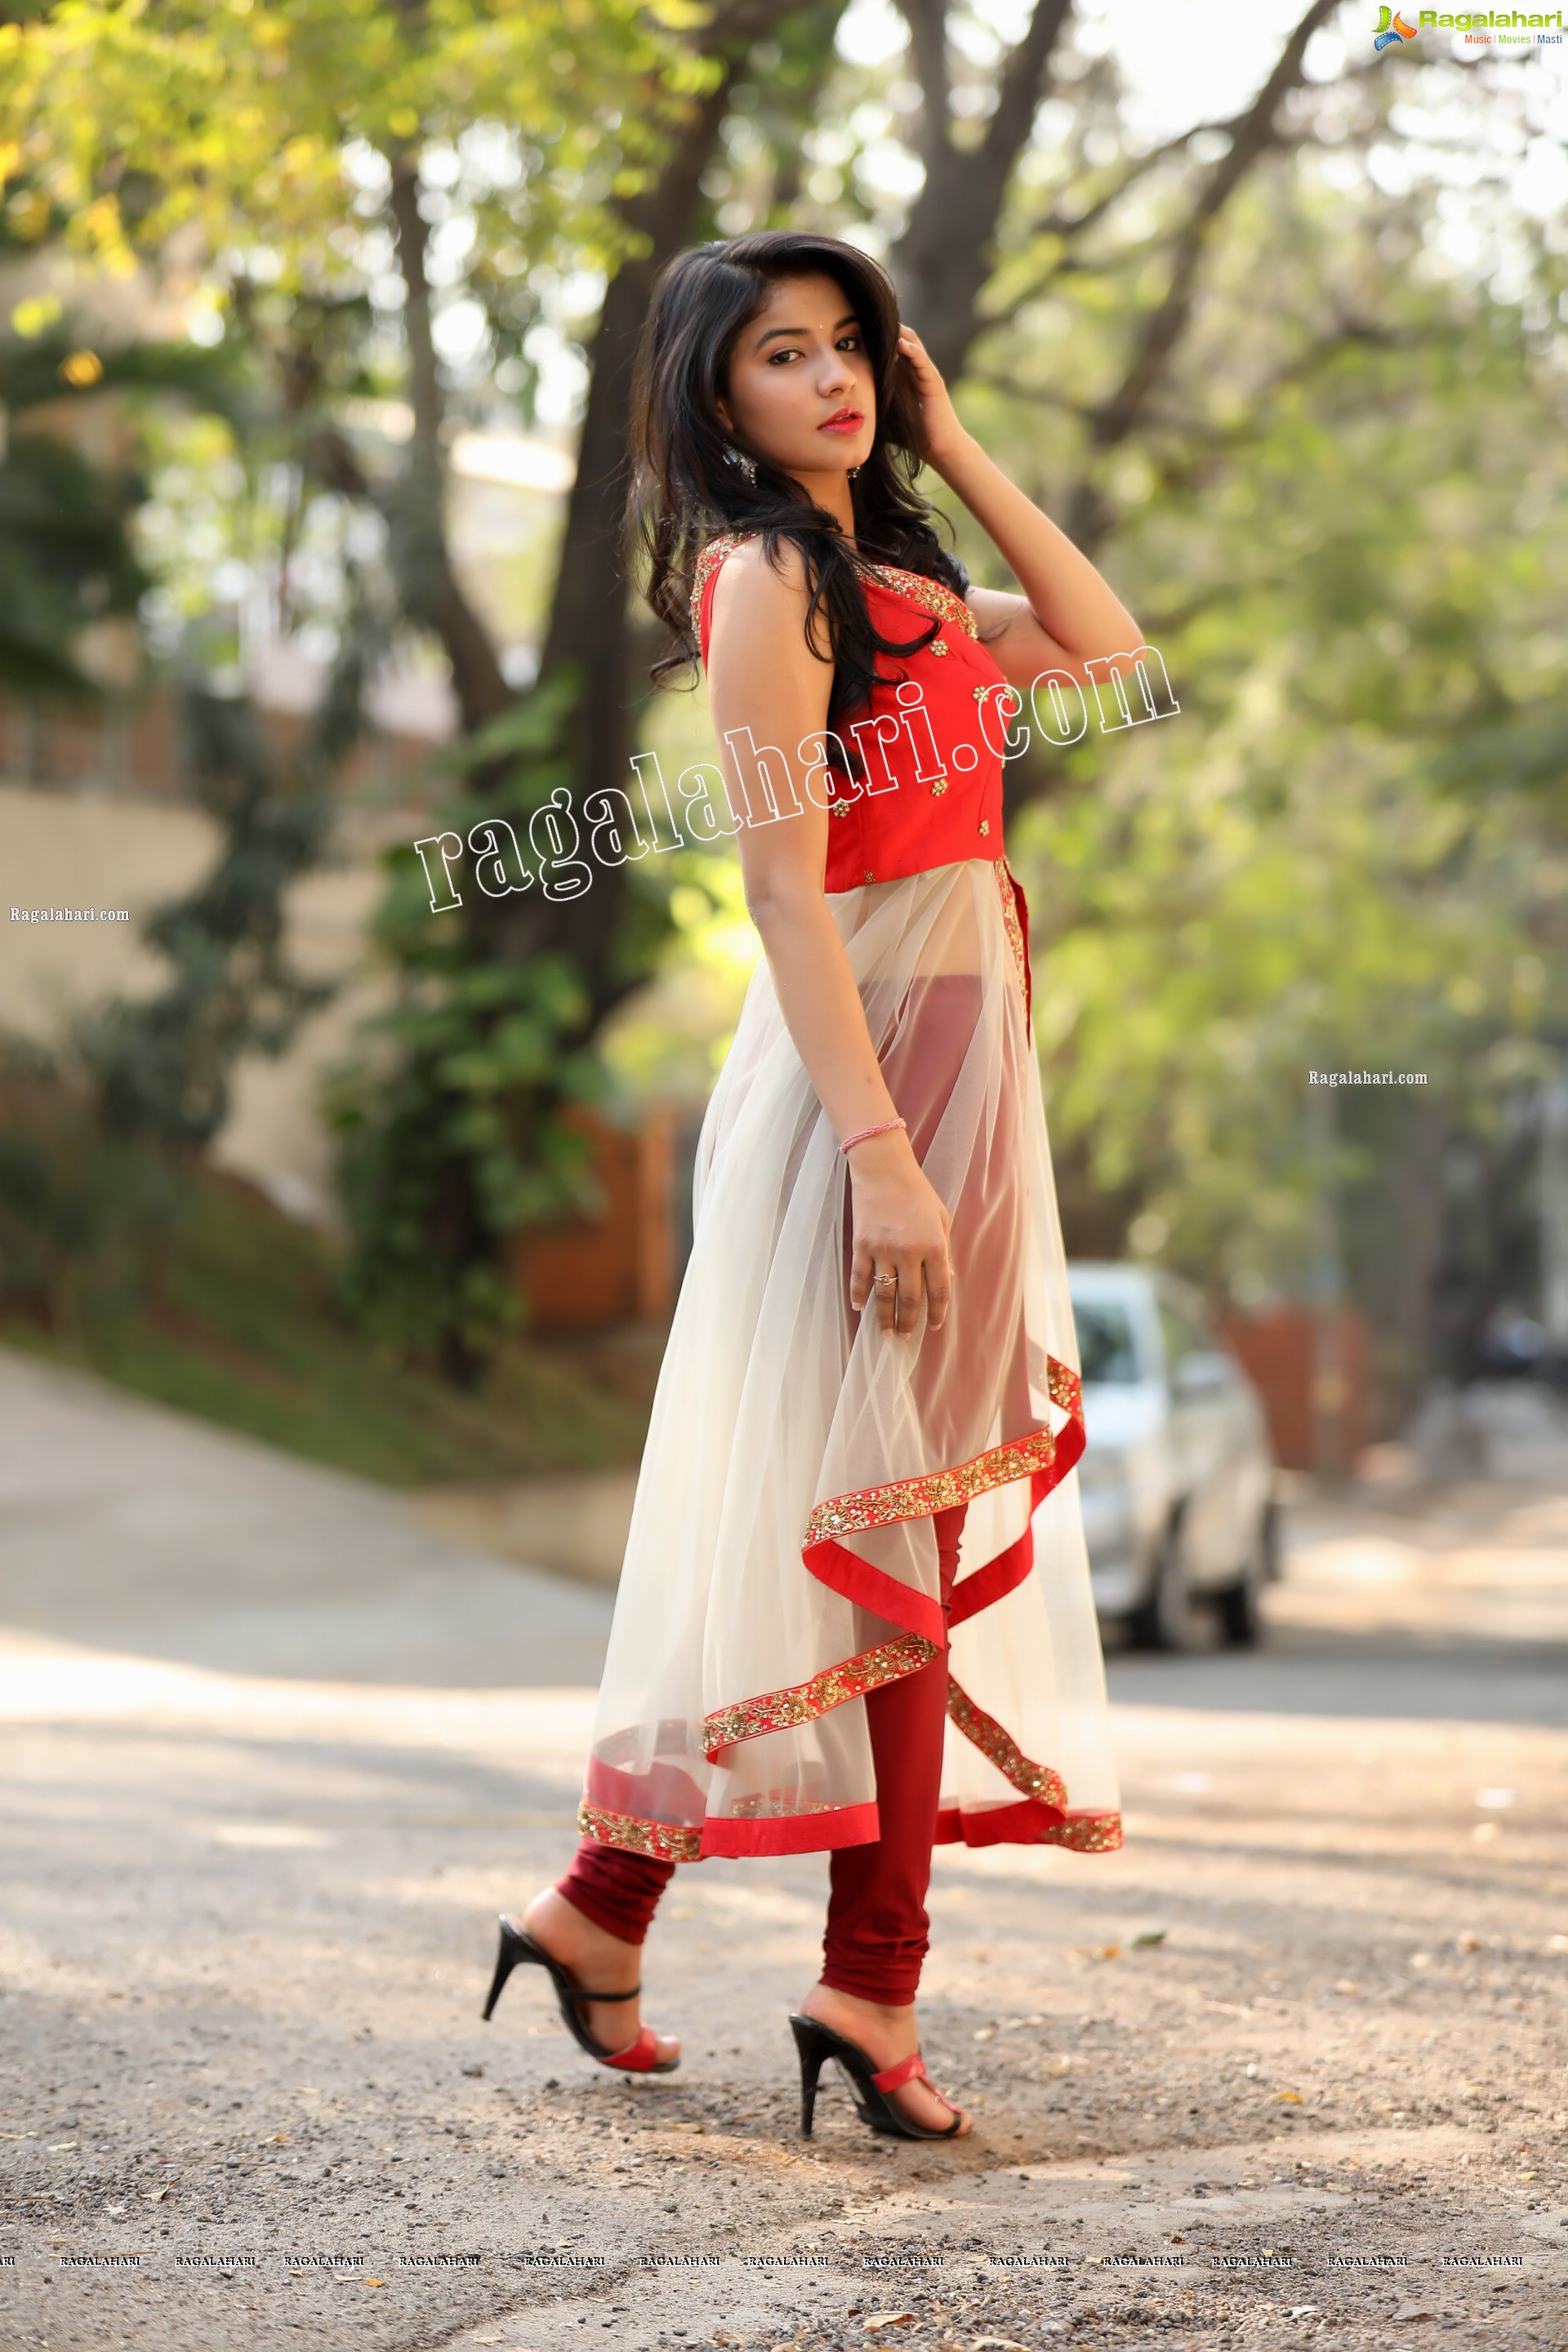 Sheetal Bhatt in Red Front Slit Tunic Top Exclusive Photo Shoot